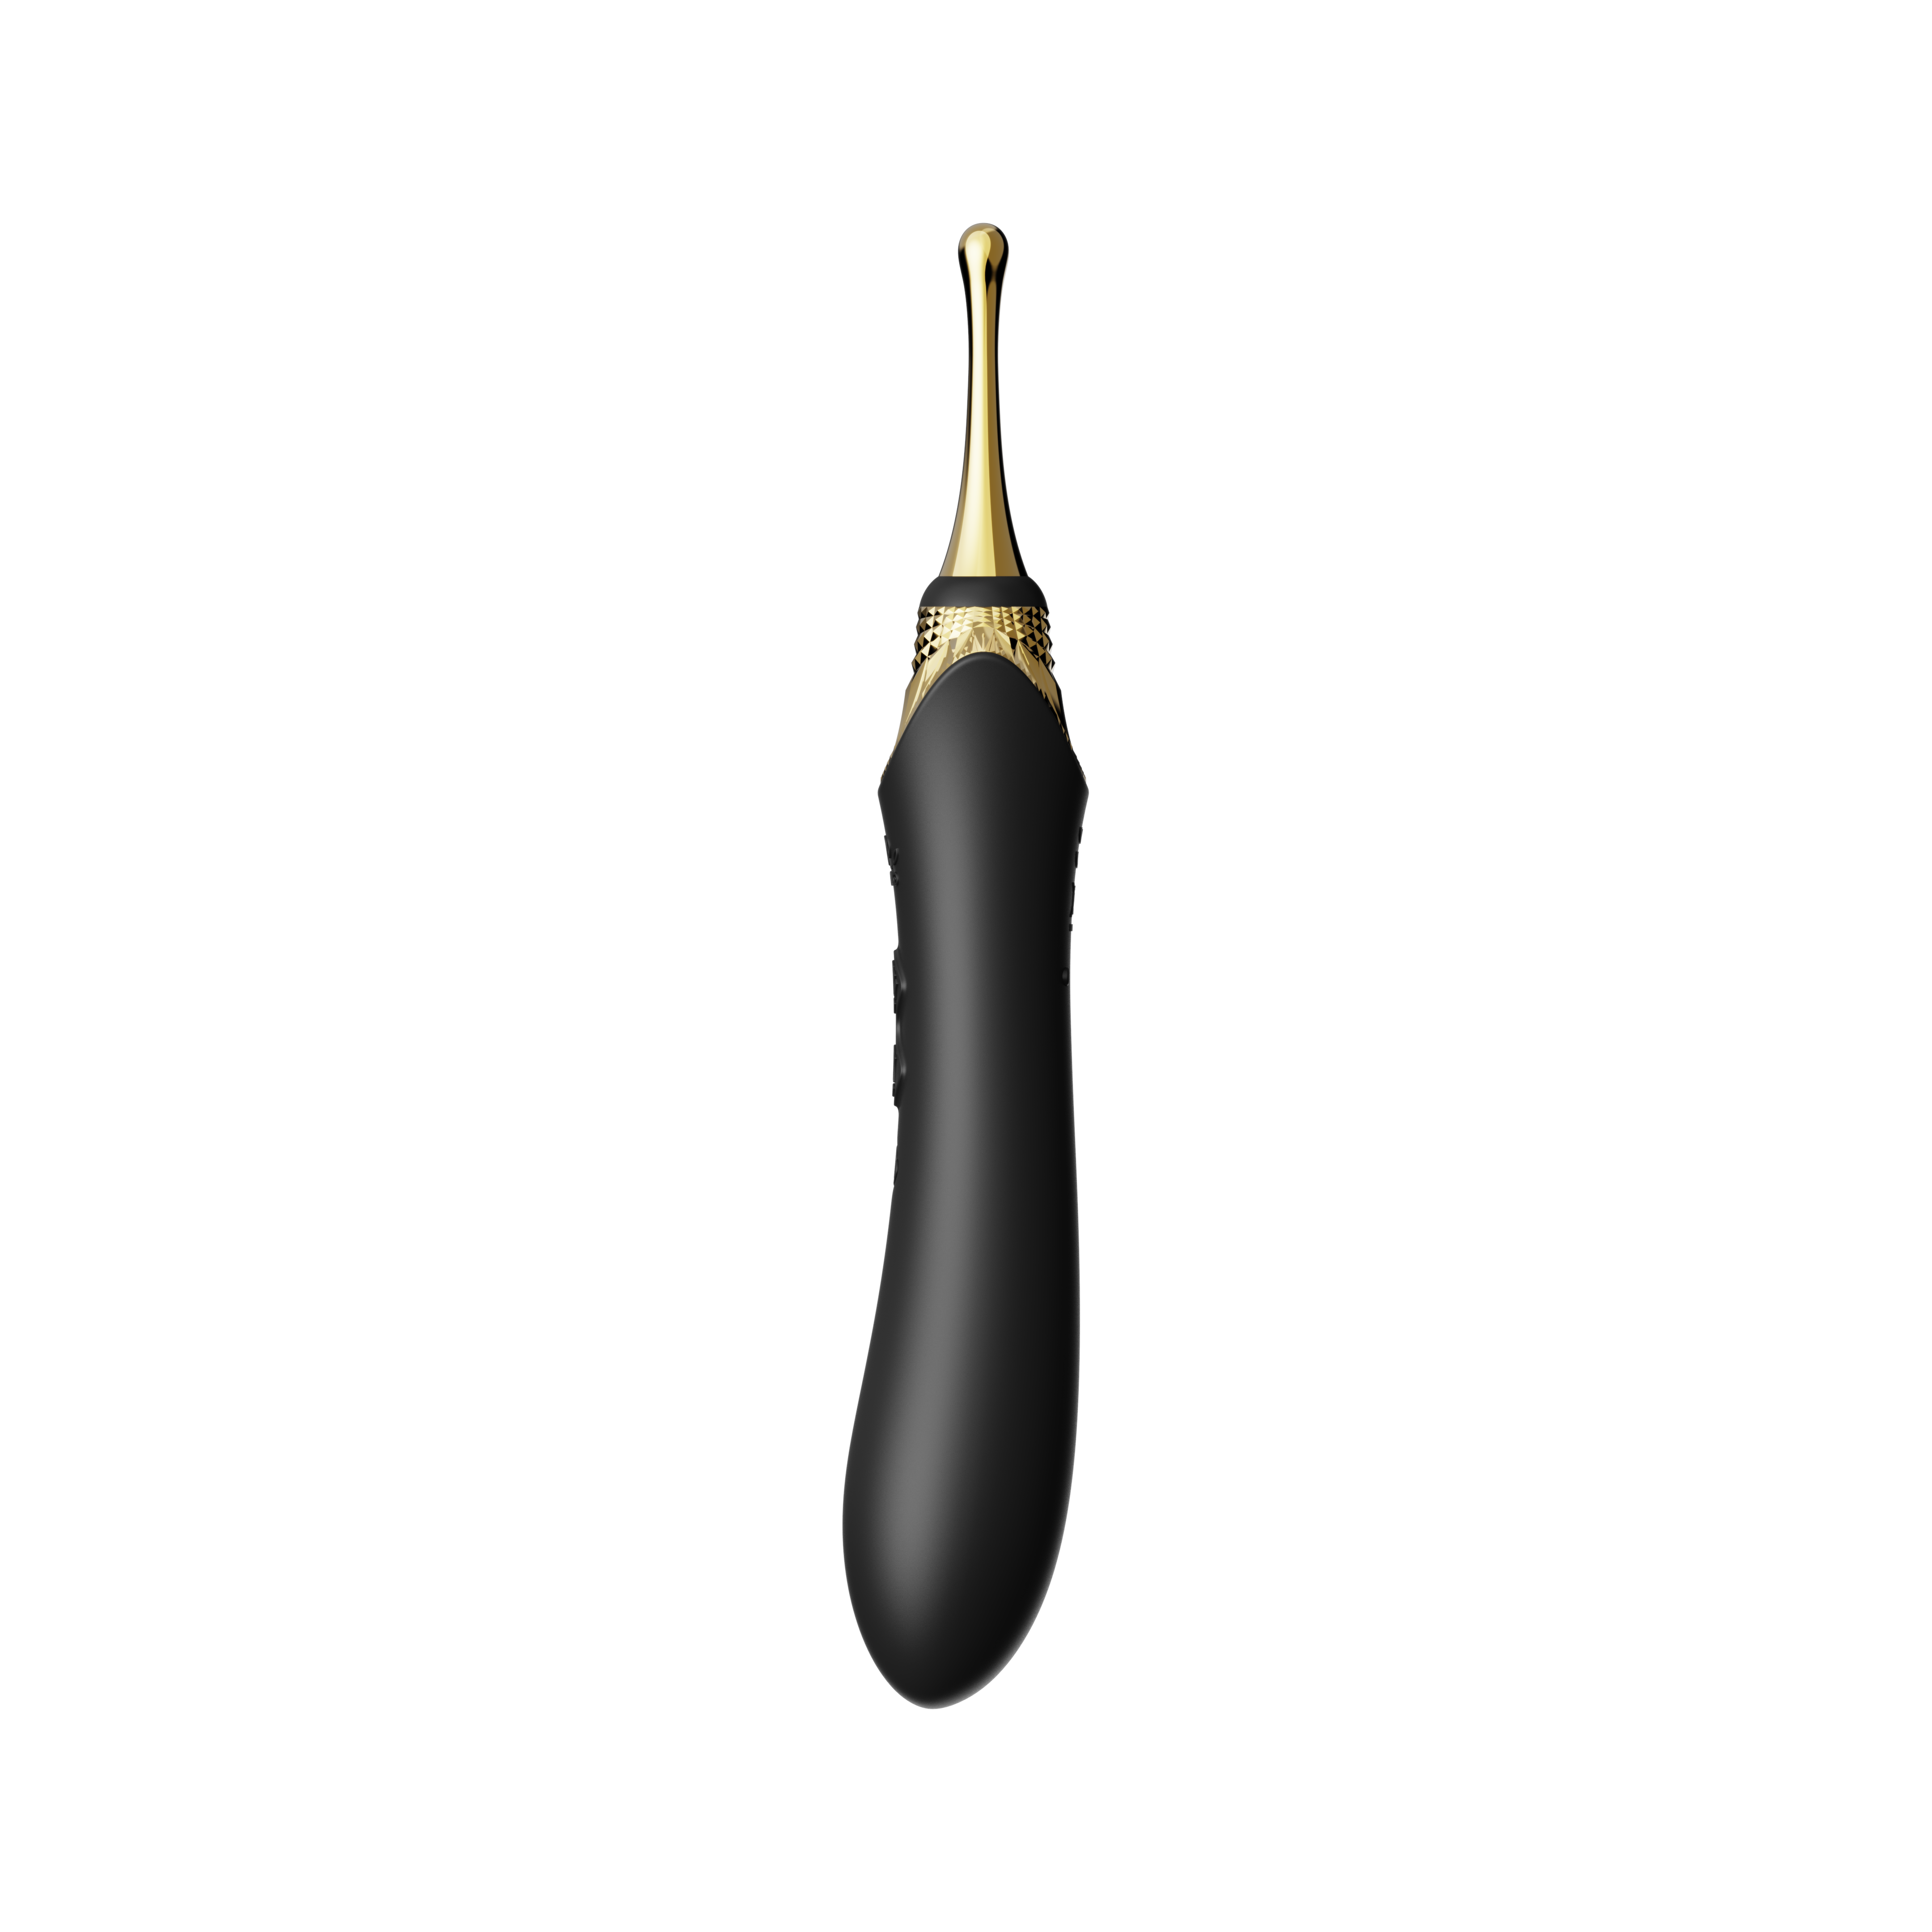 Bess 2 Clitoral Massager | Targeted Stimulation Clit Massager with 8 Vibration Modes | Waterproof Sex Toy | USB Rechargeable Batter | 1-yr Warranty | Obsidian Black